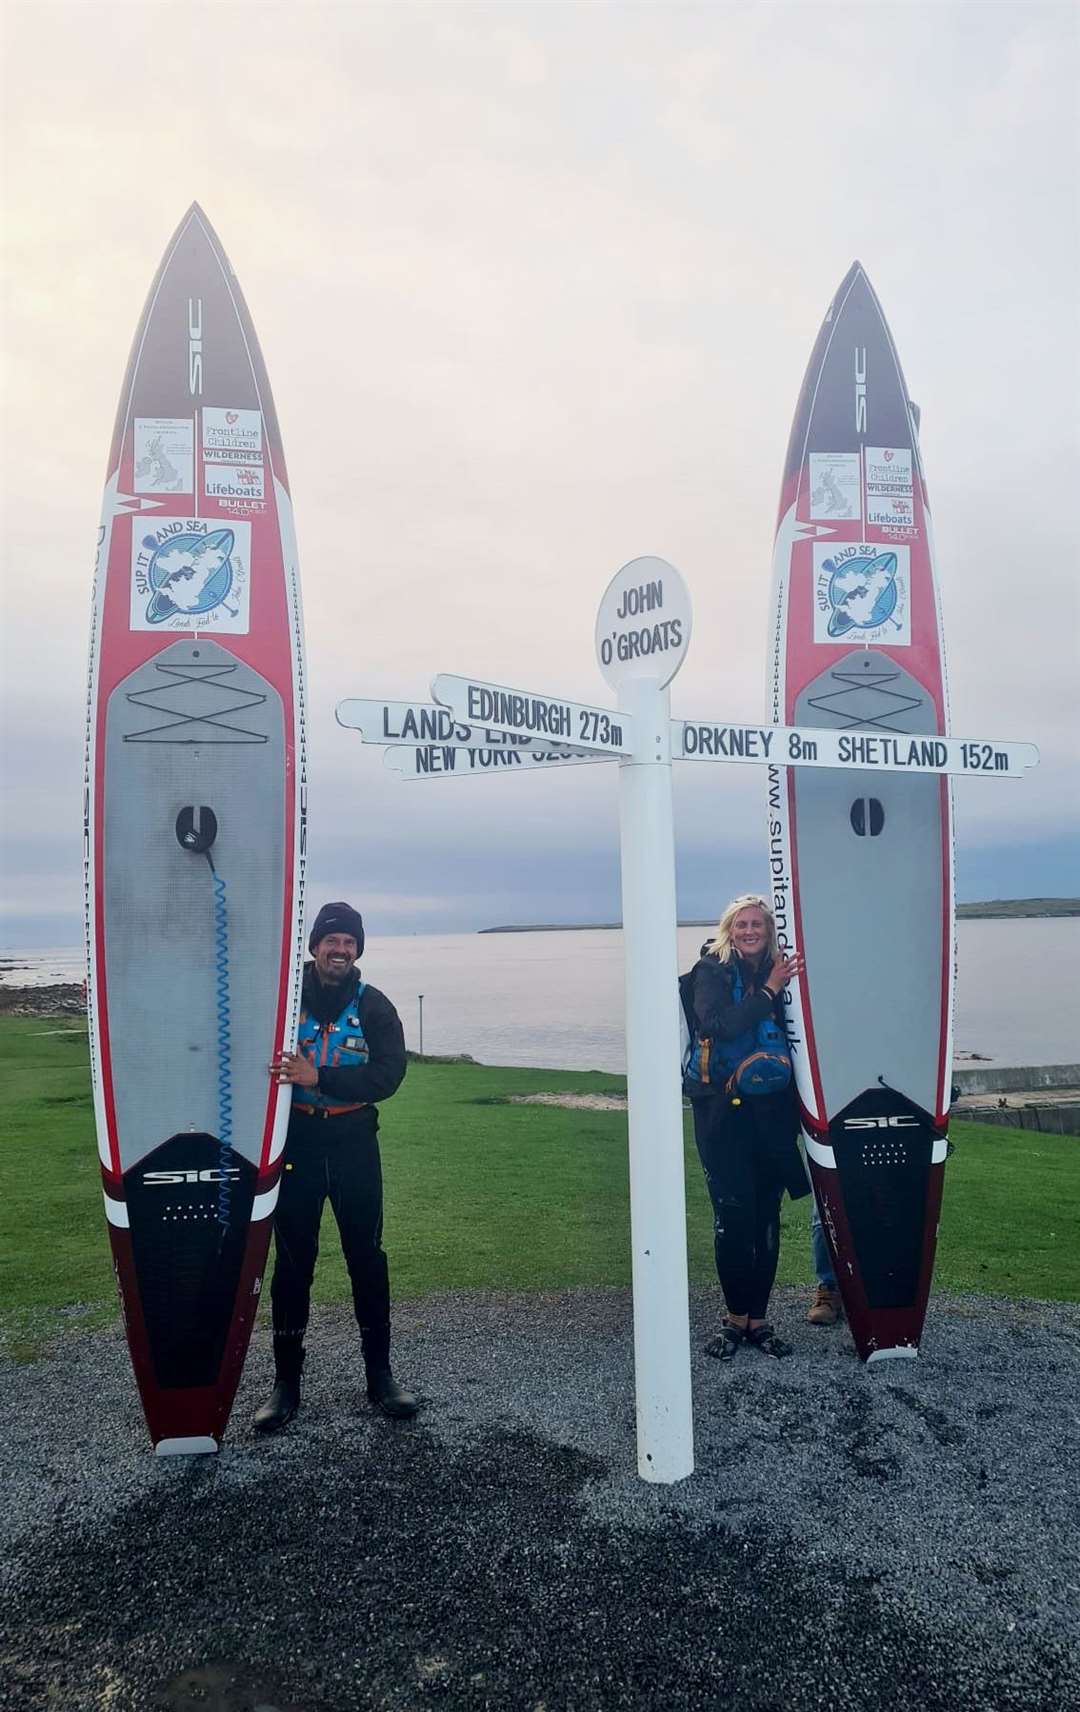 Dave and Sophie with their paddleboards after arriving at John O'Groats.